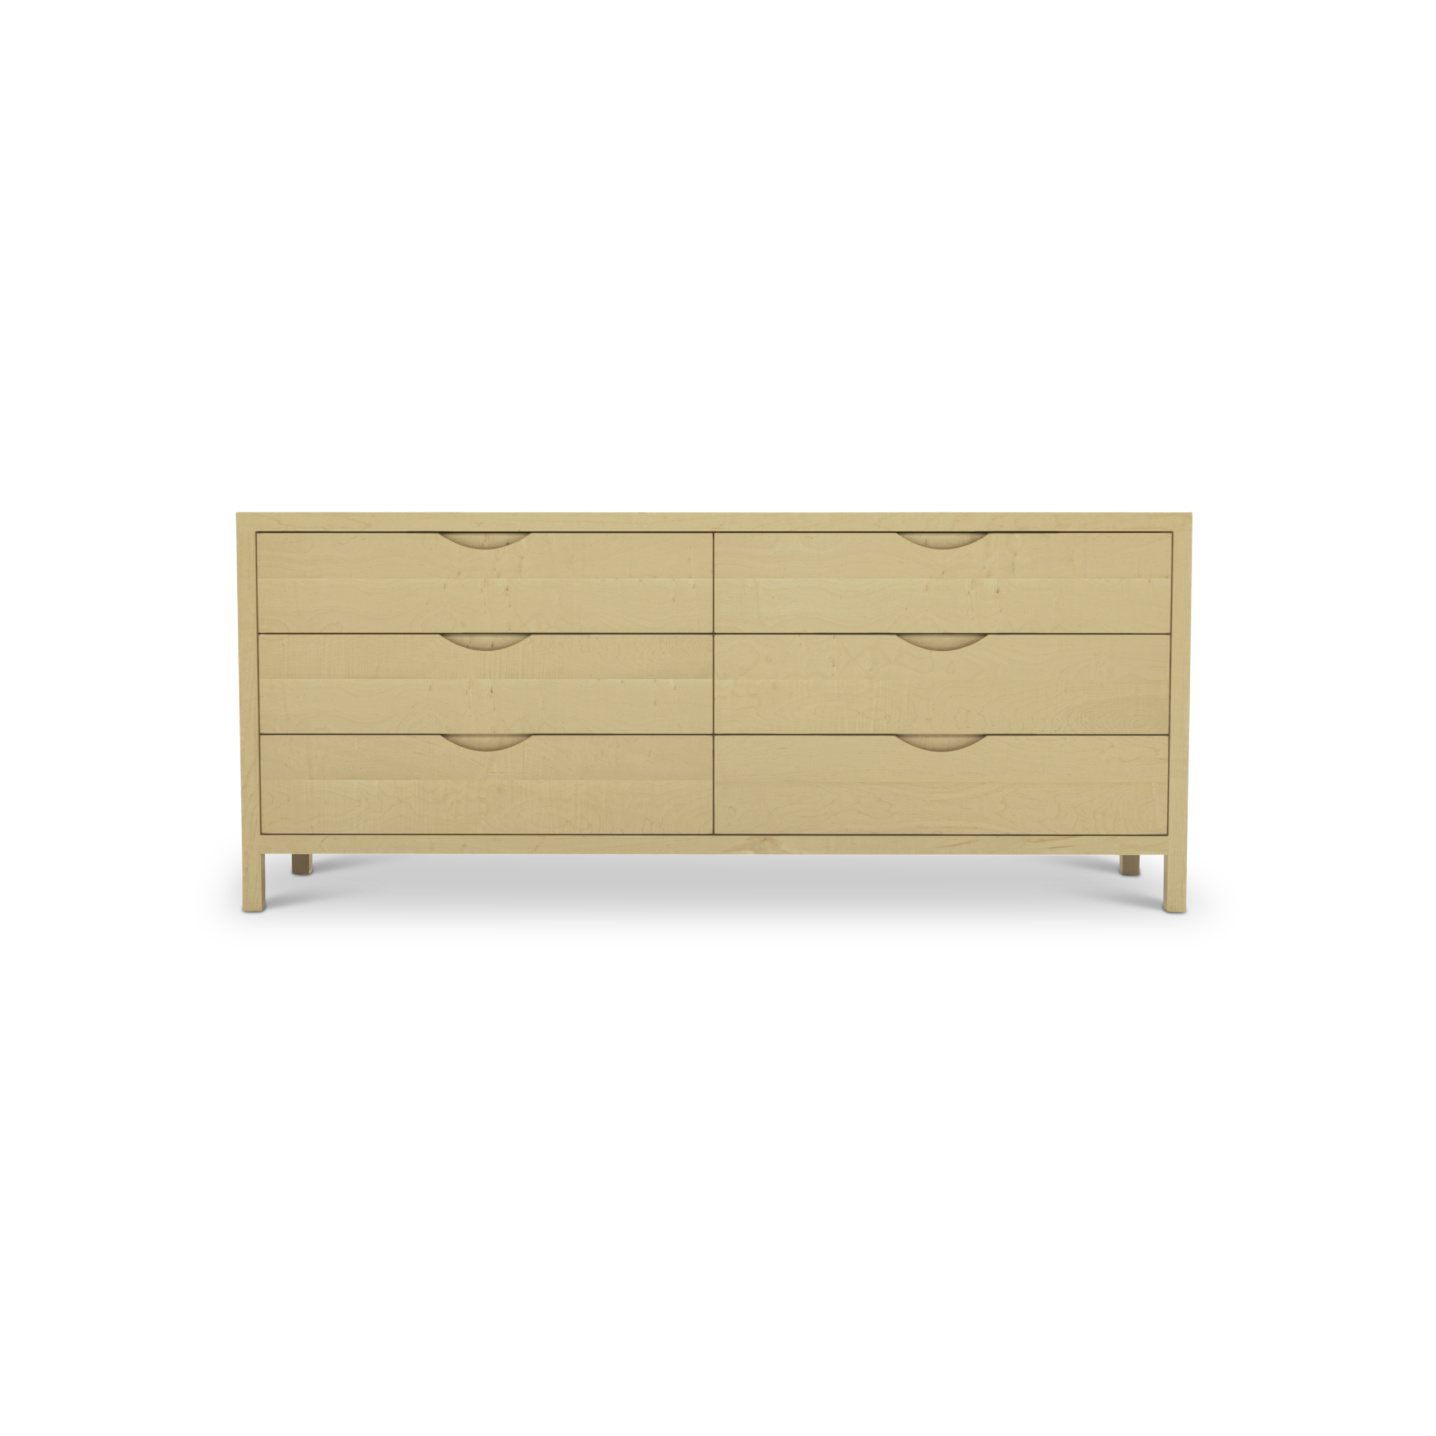 72" Solid maple Danish dresser with integrated handles